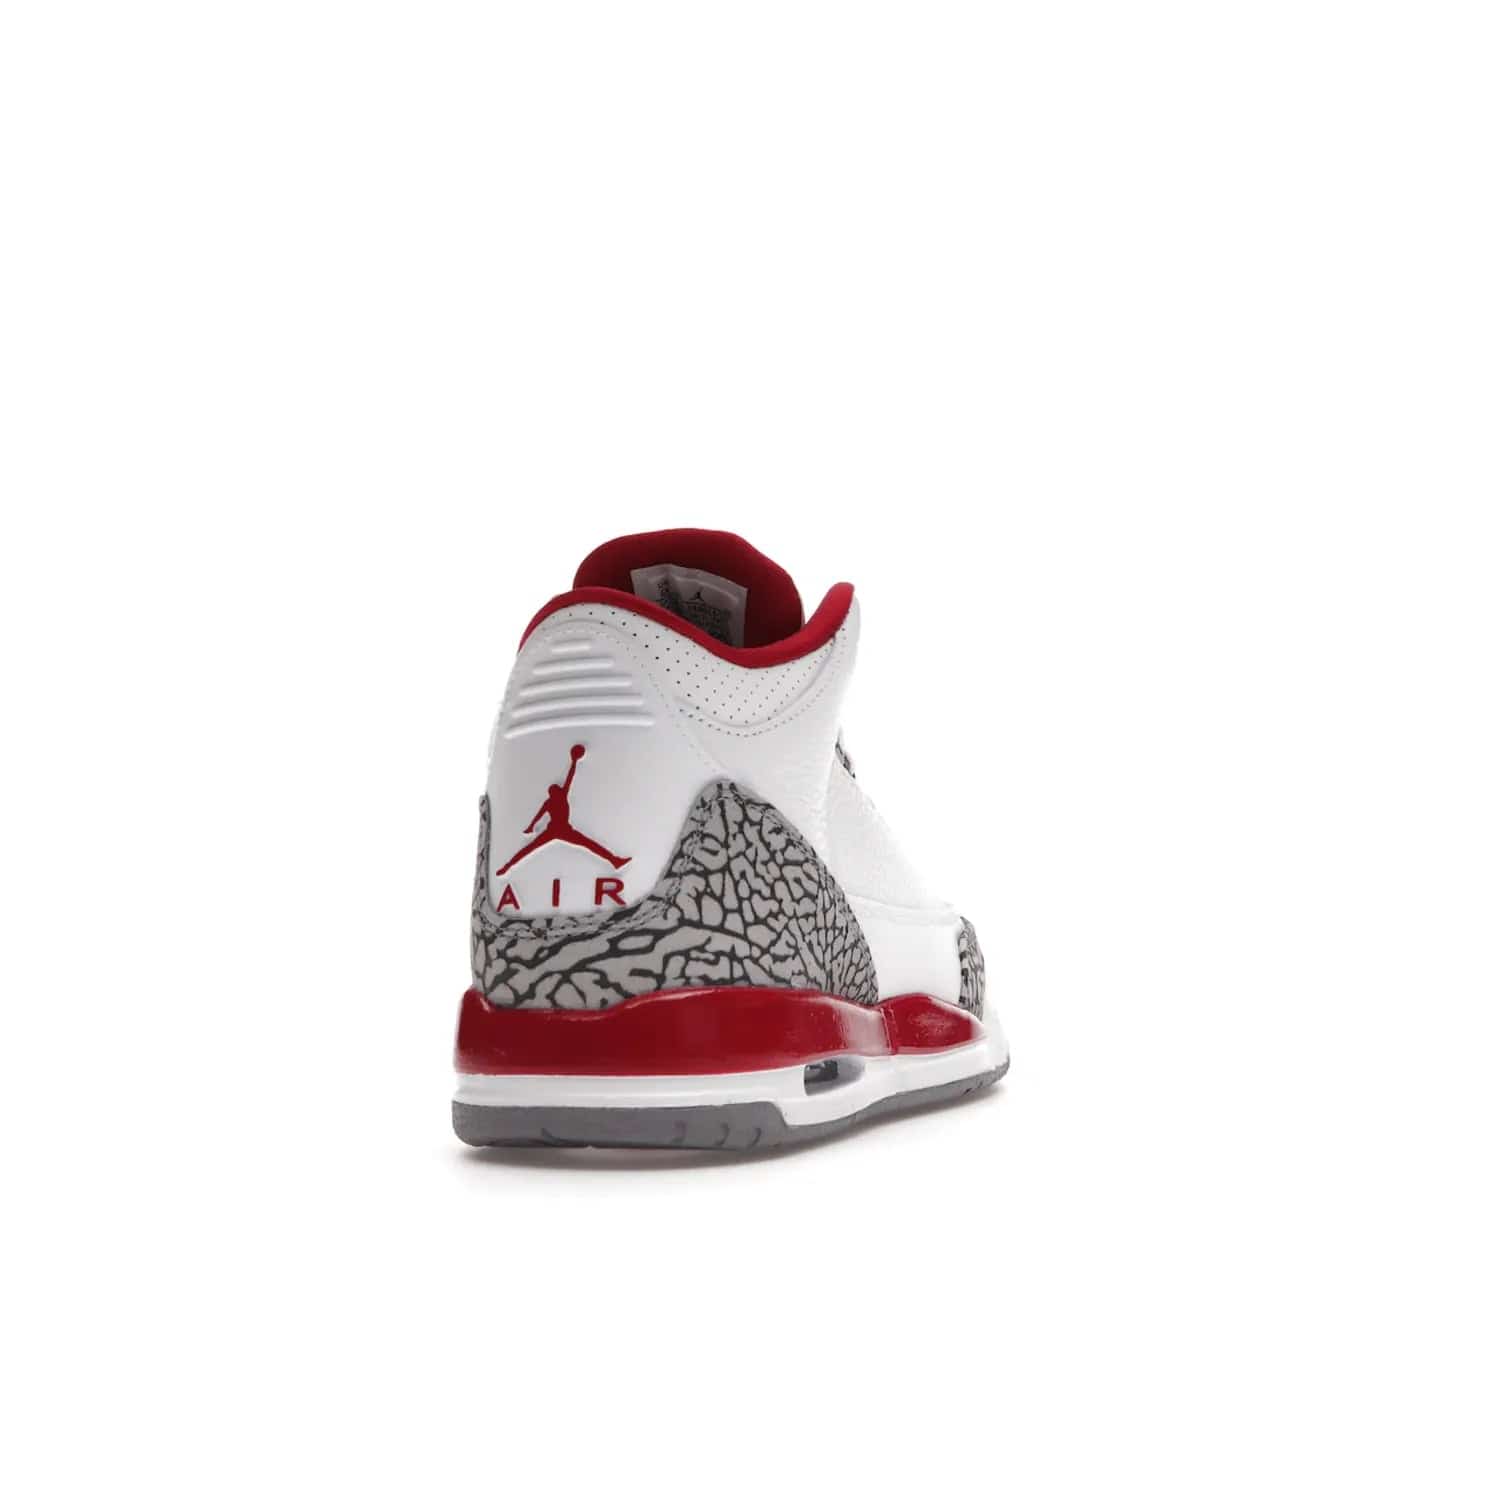 Jordan 3 Retro Cardinal (GS) - Image 30 - Only at www.BallersClubKickz.com - Shop the kid-sized Air Jordan 3 Retro Cardinal GS, released Feb 2022. White tumbled leather upper, light curry accenting, cement grey and classic red details throughout. Visible Air cushioning, midsole, and an eye-catching outsole. Show off your style with this fashionable streetwear silhouette.